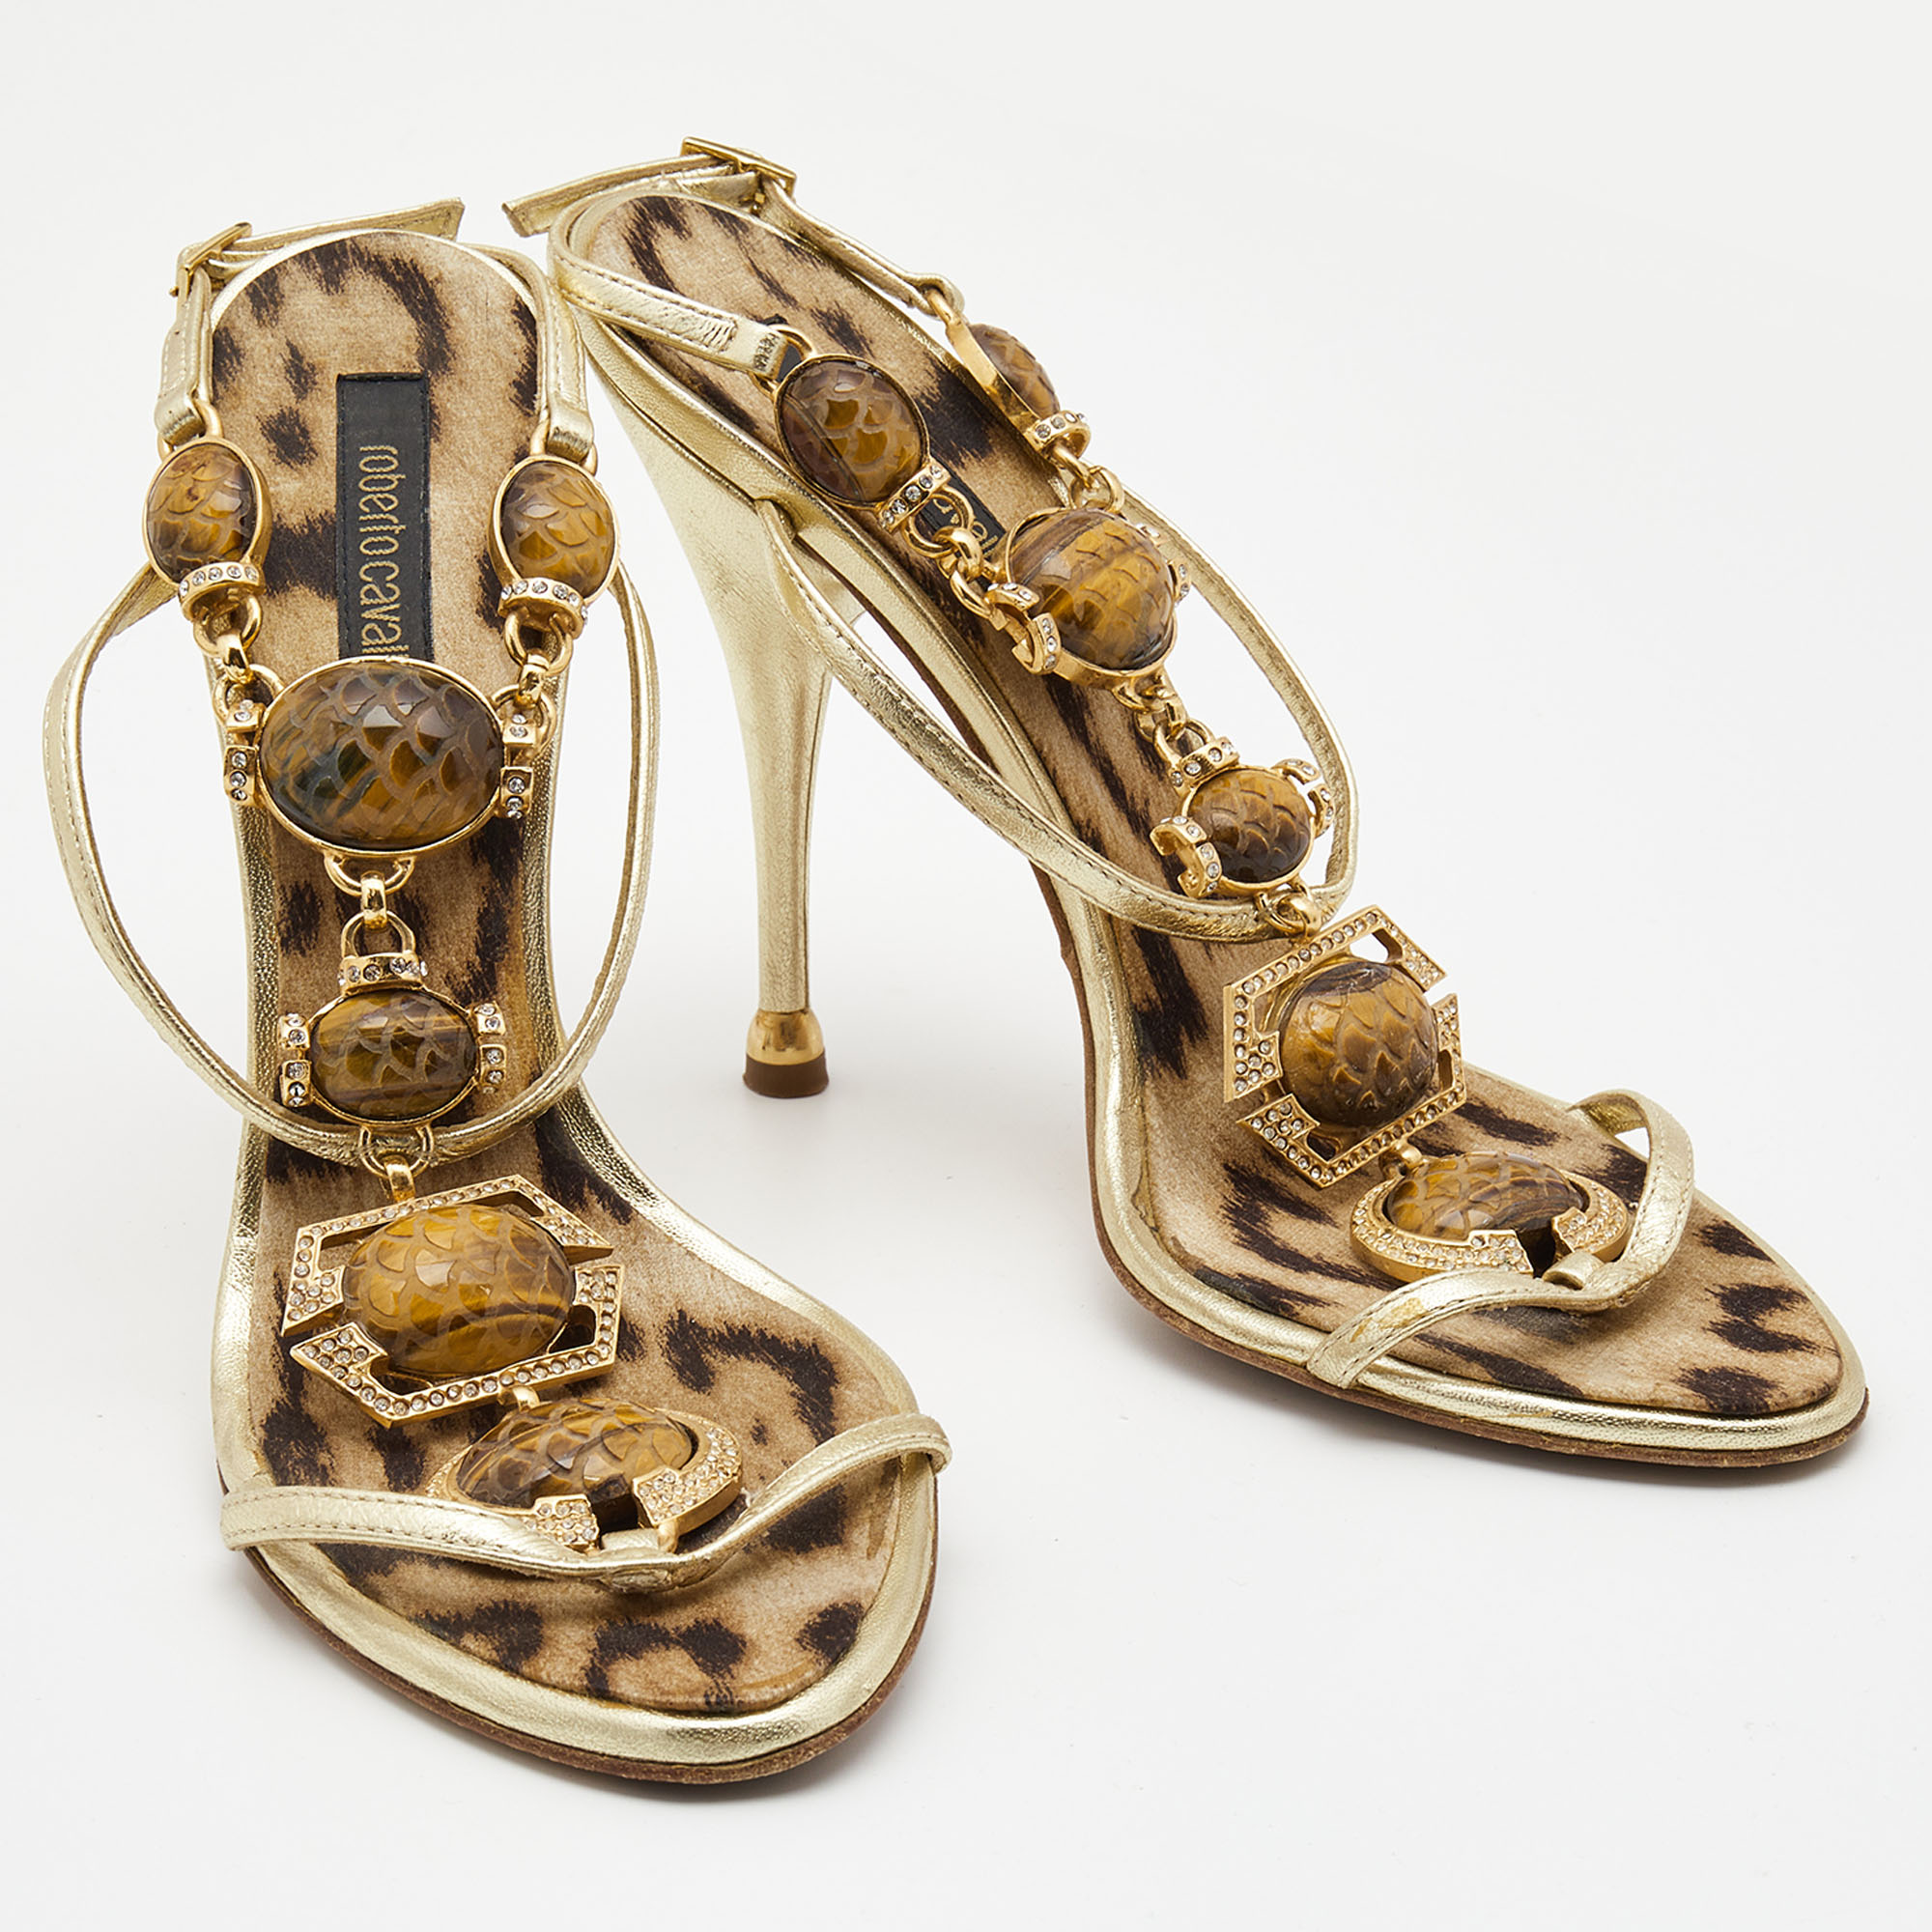 Roberto Cavalli Gold Leather Jeweled And Crystal Embellished T-Strap Sandals Size 38